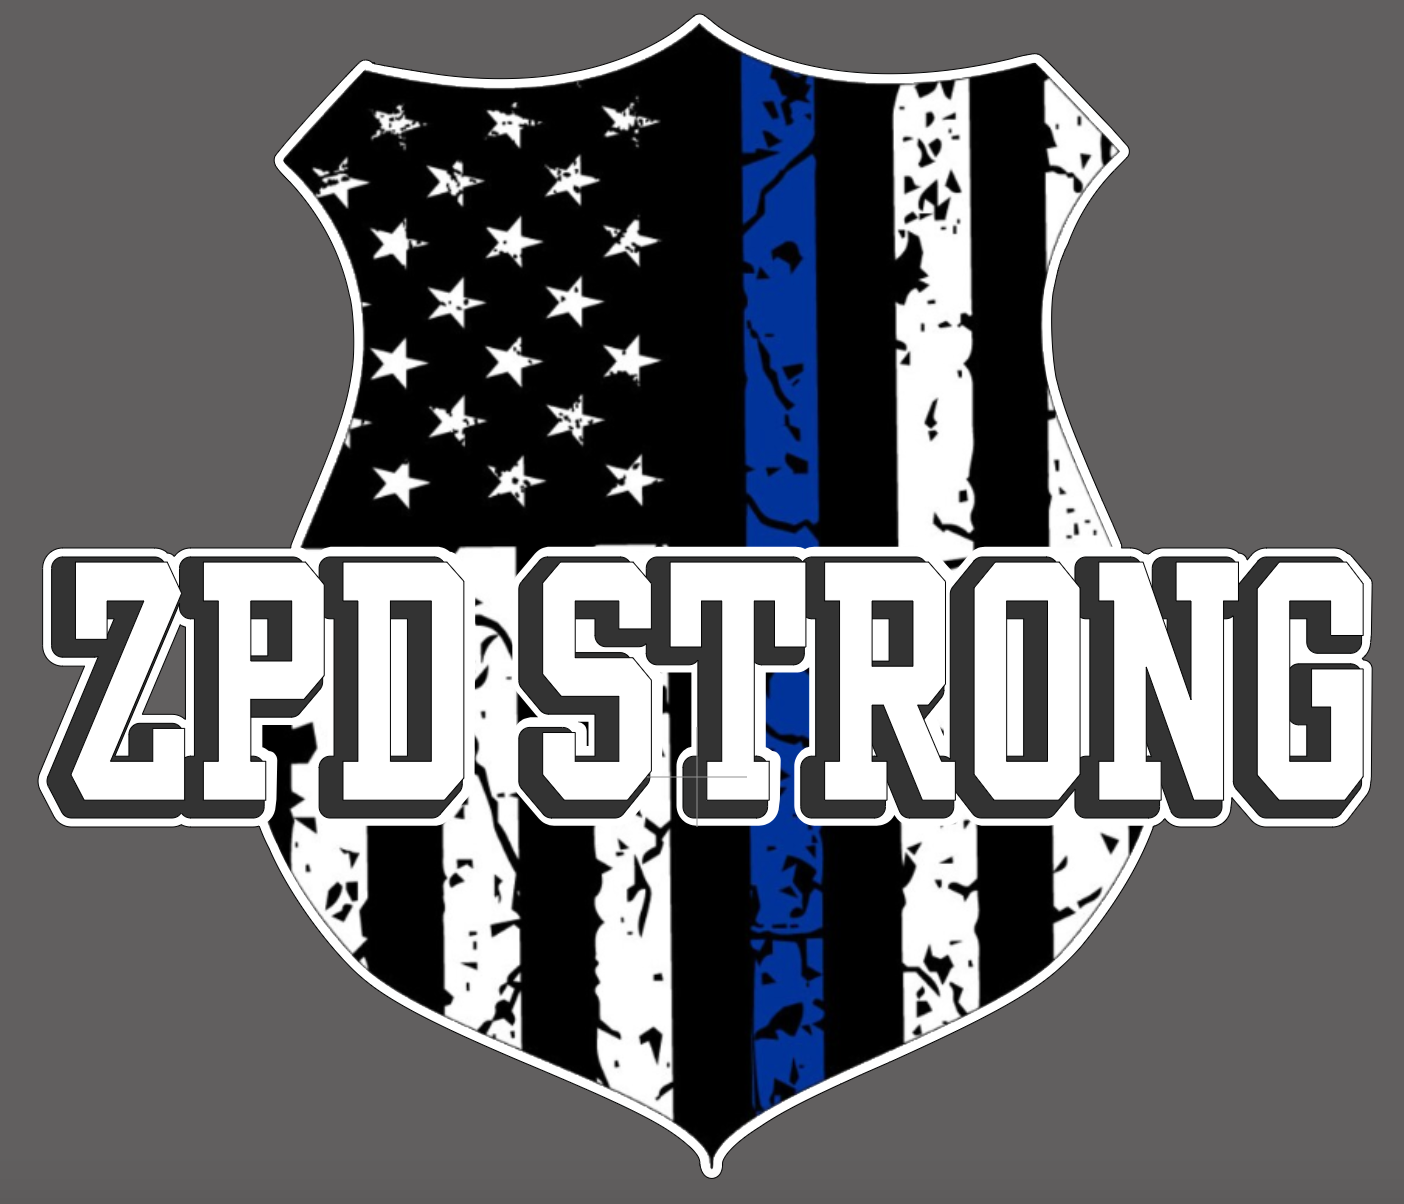 ZPD Strong Softstyle Tee